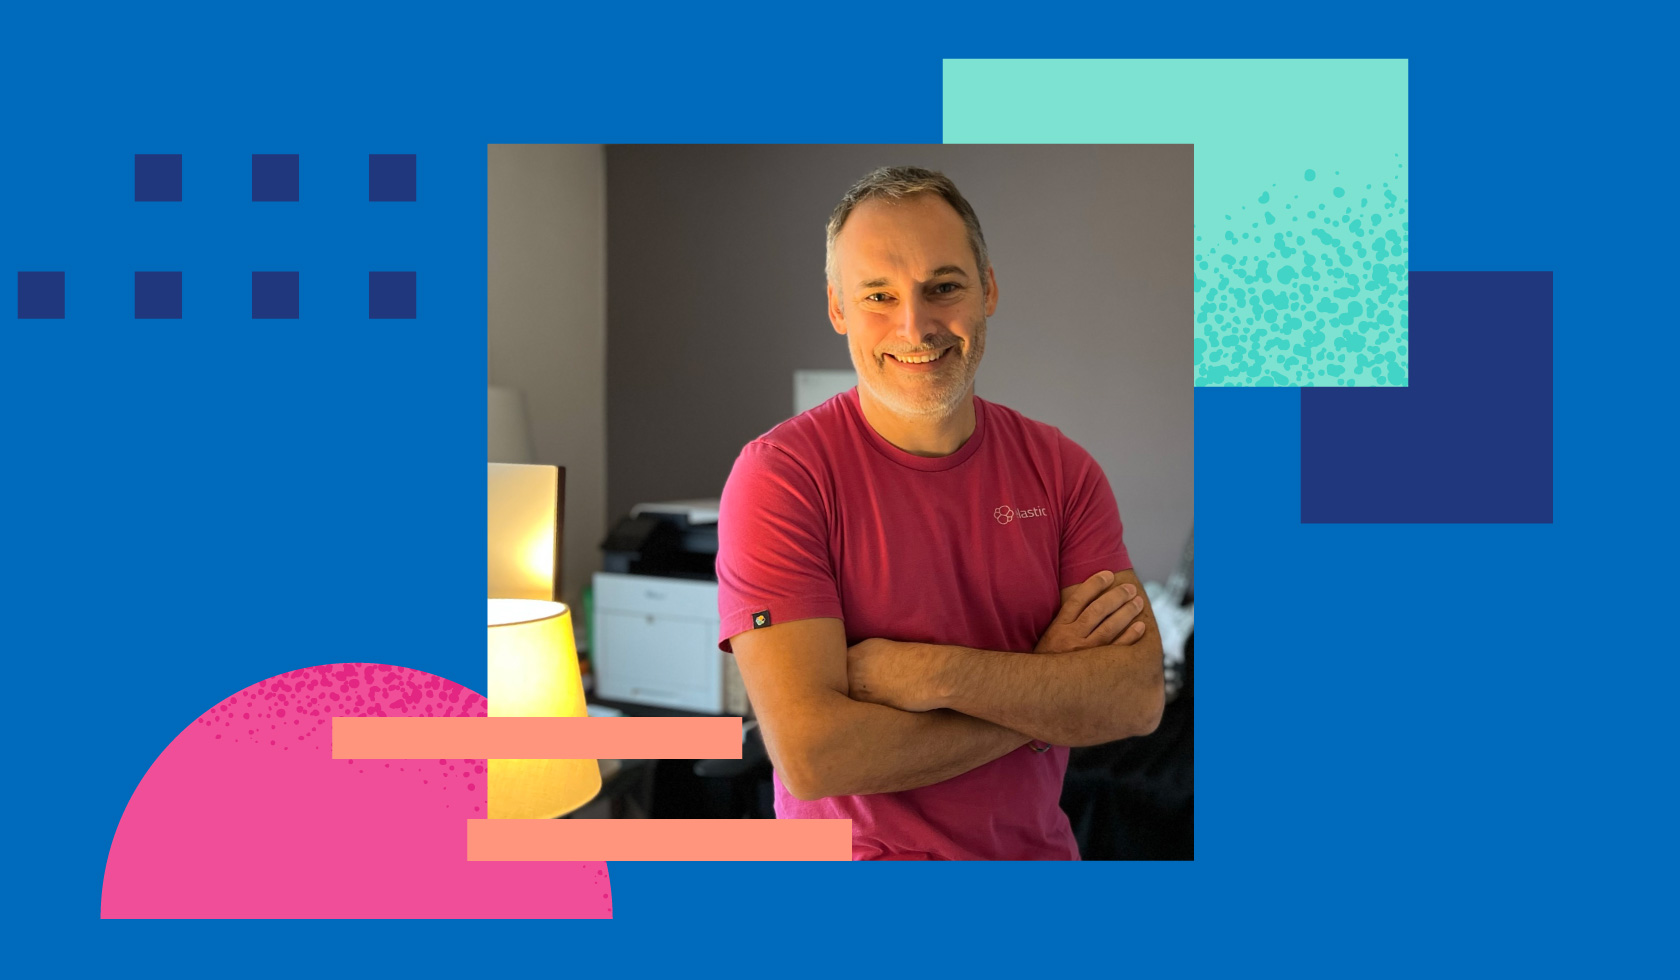 Someone Like Me: David Pilato reflects on 9 years at Elastic and why you need to step outside your comfort zone